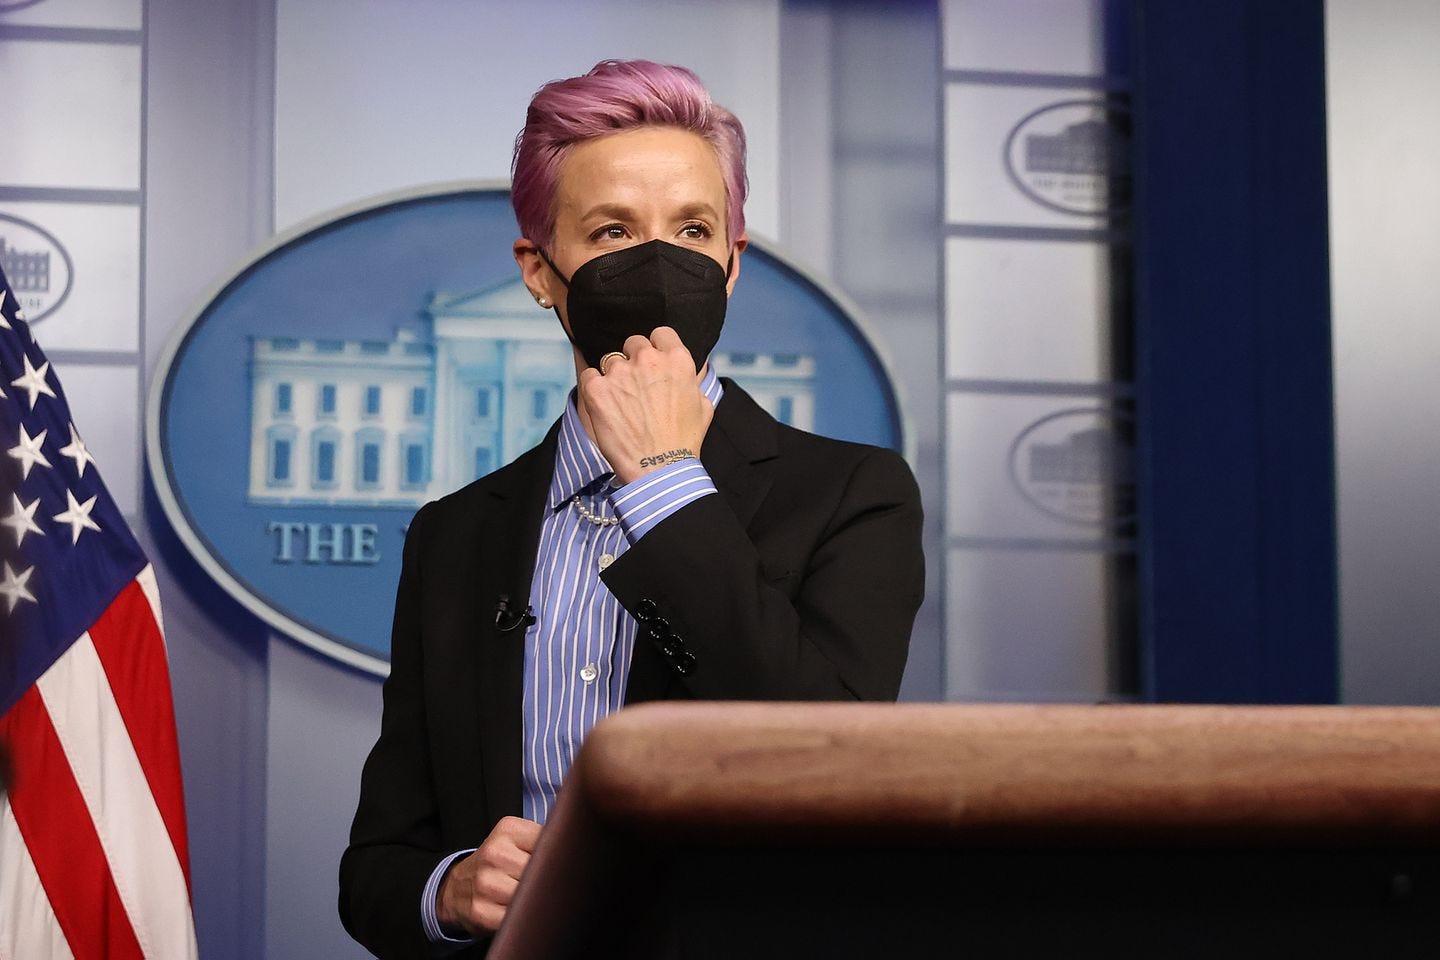 Professional soccer player Megan Rapinoe stood at the podium of the Brady Press Briefing Room before meeting with President Biden to raise awareness of pay disparity issues.